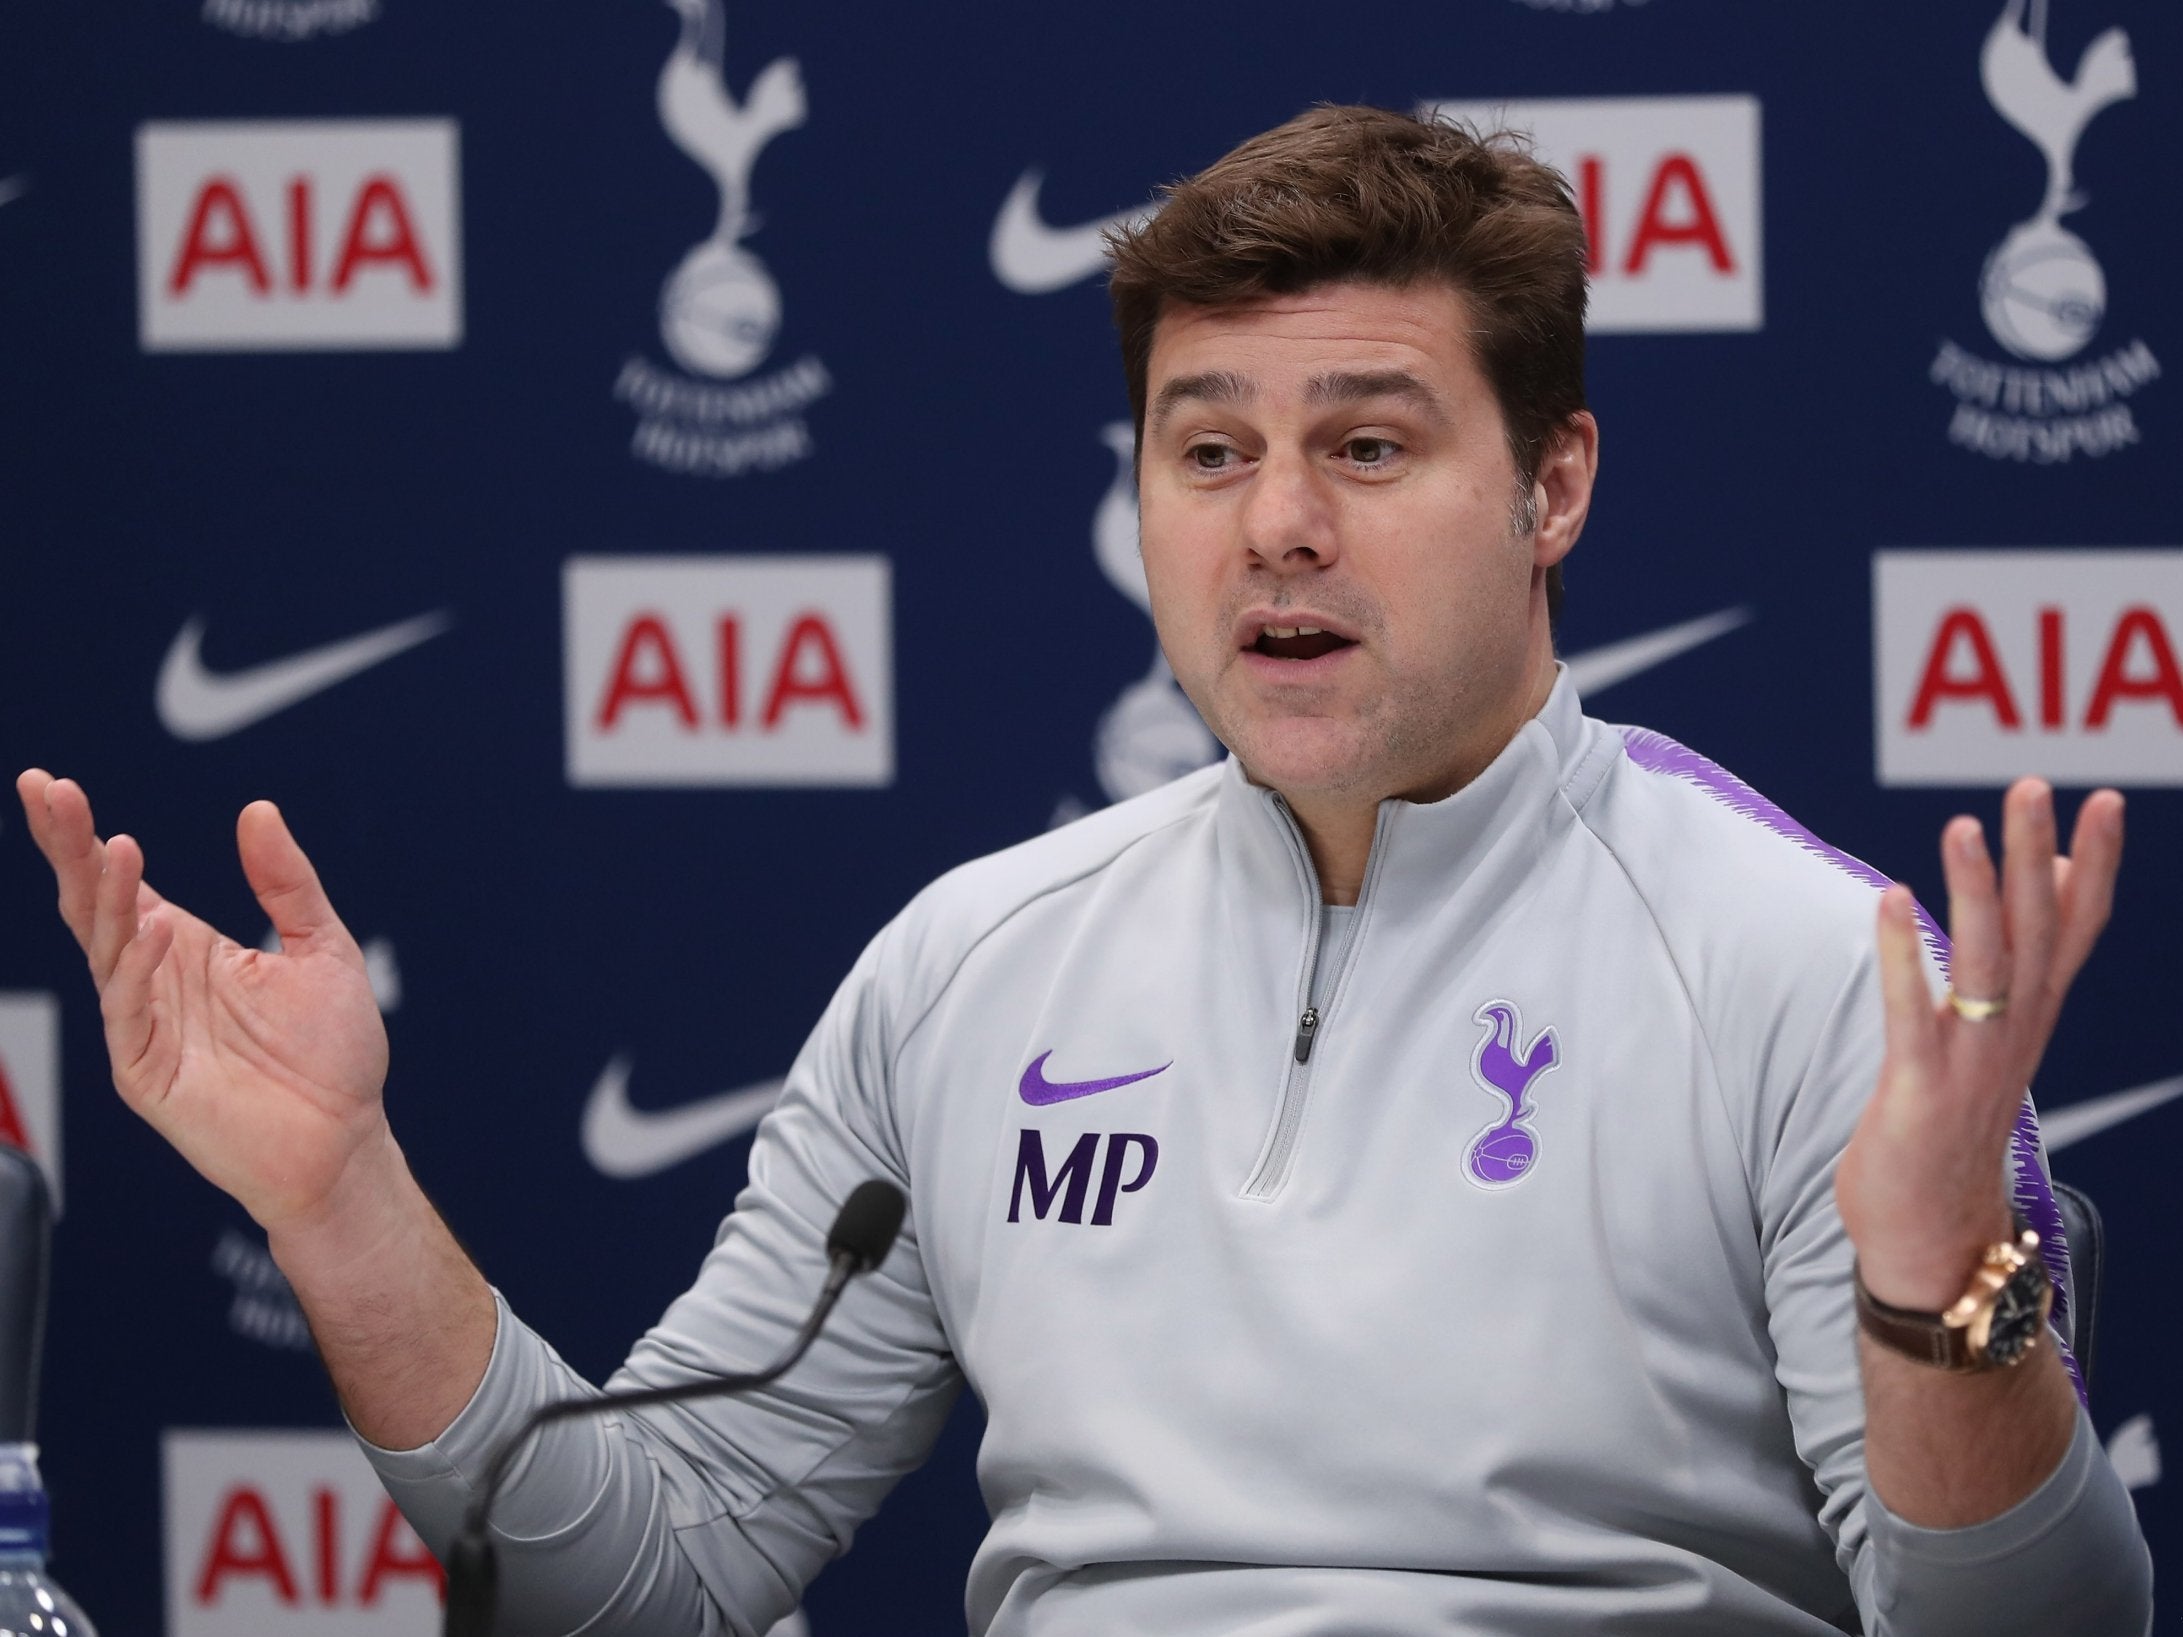 Pochettino defended Bielsa over the Derby County 'spygate' scandal